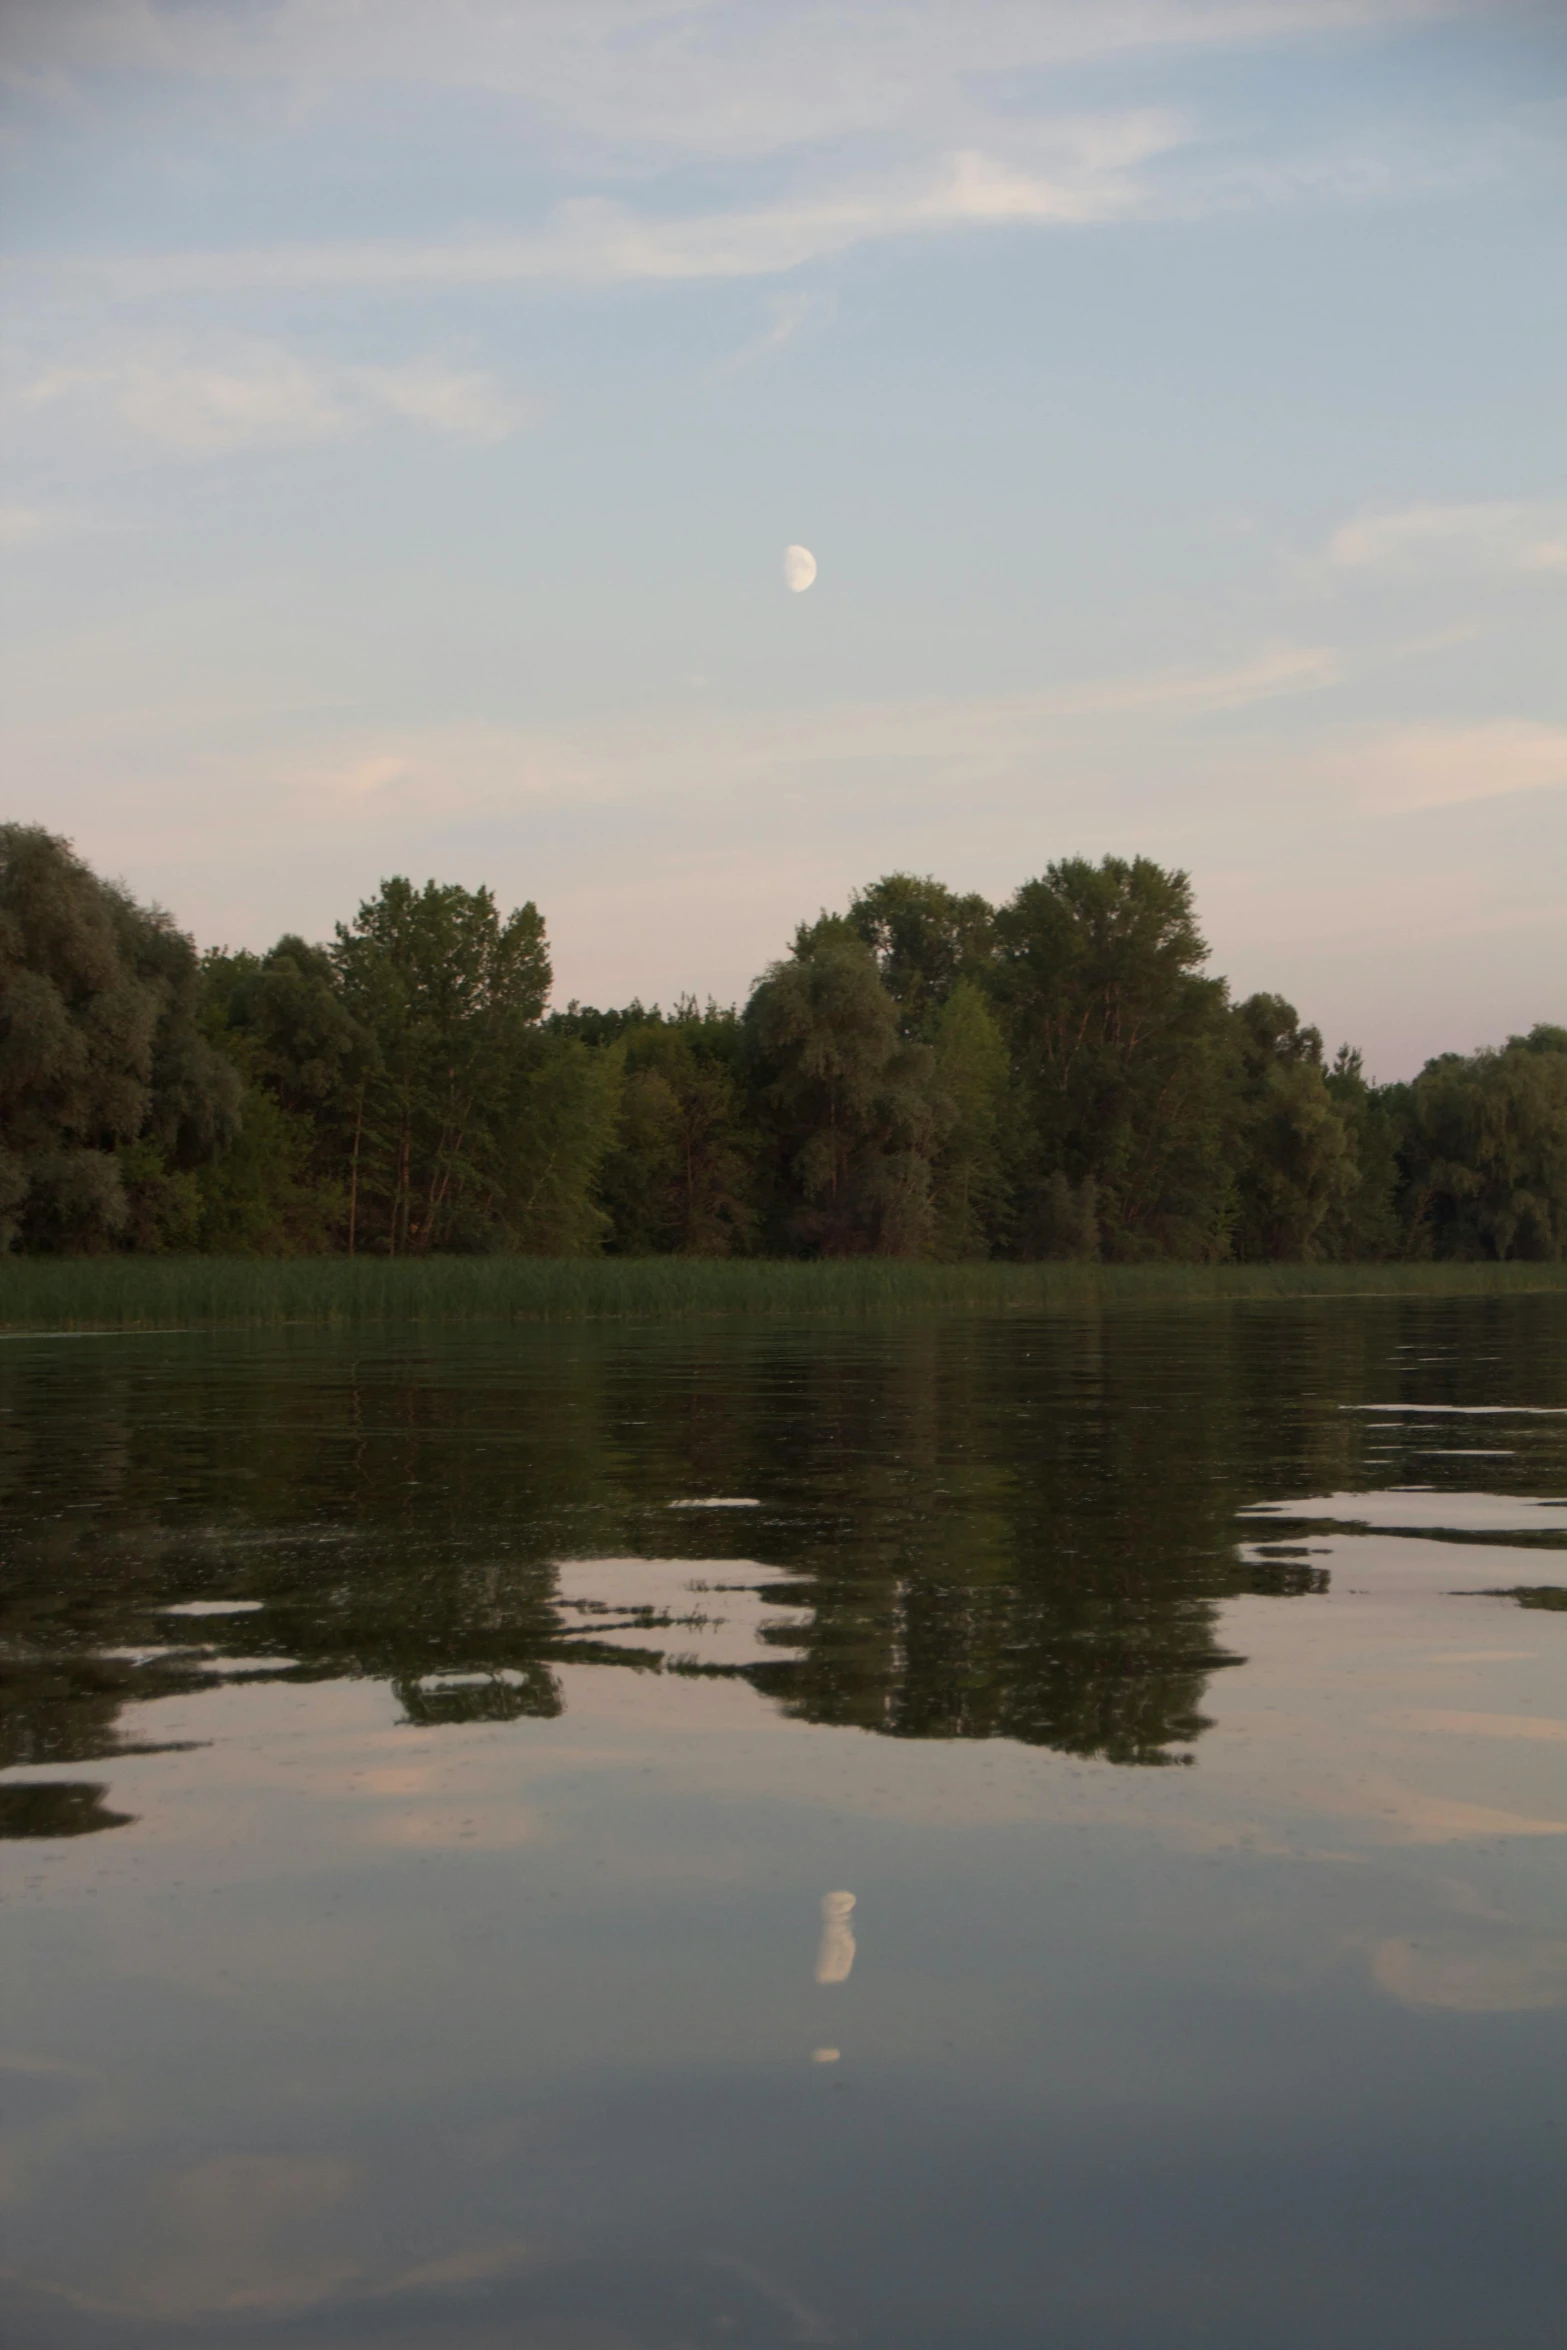 the water and trees are reflecting the moon